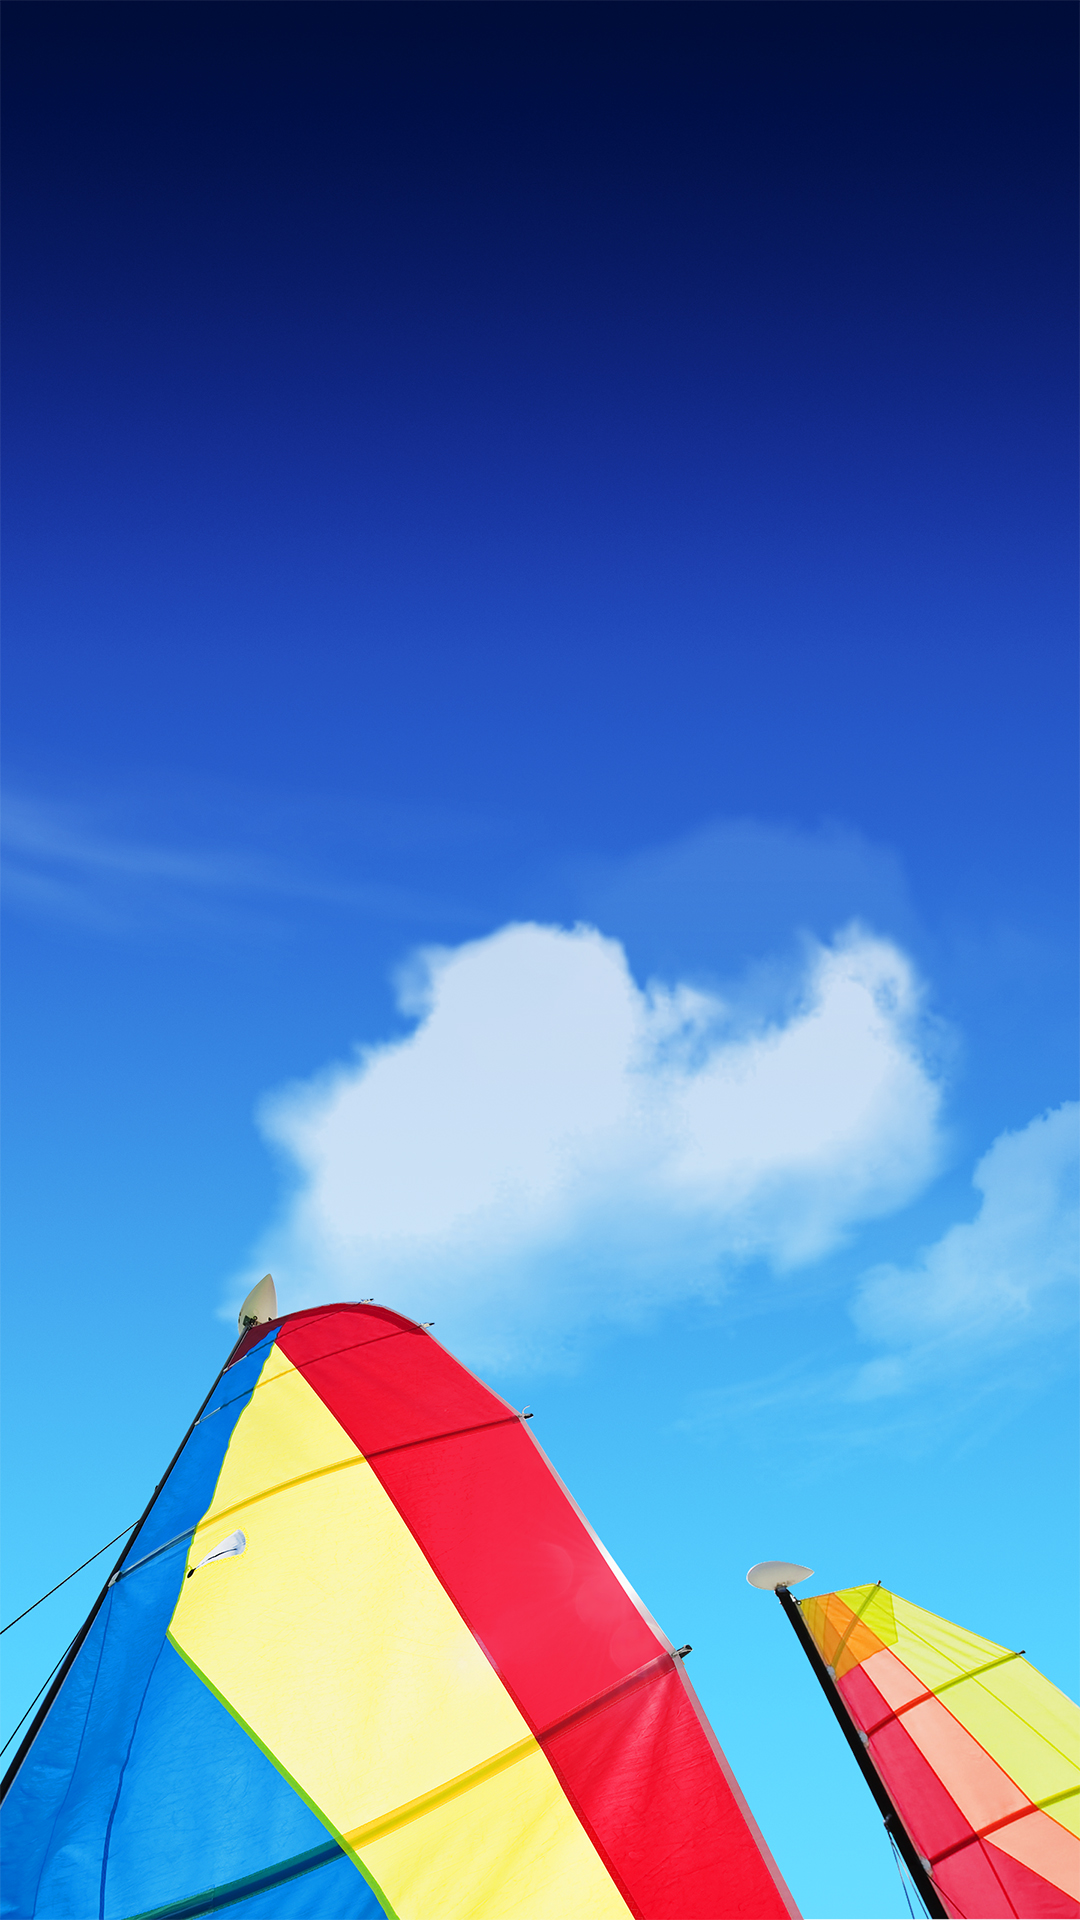 Lenovo Stock Blue Sky Colorful Boats Android Wallpaper free download